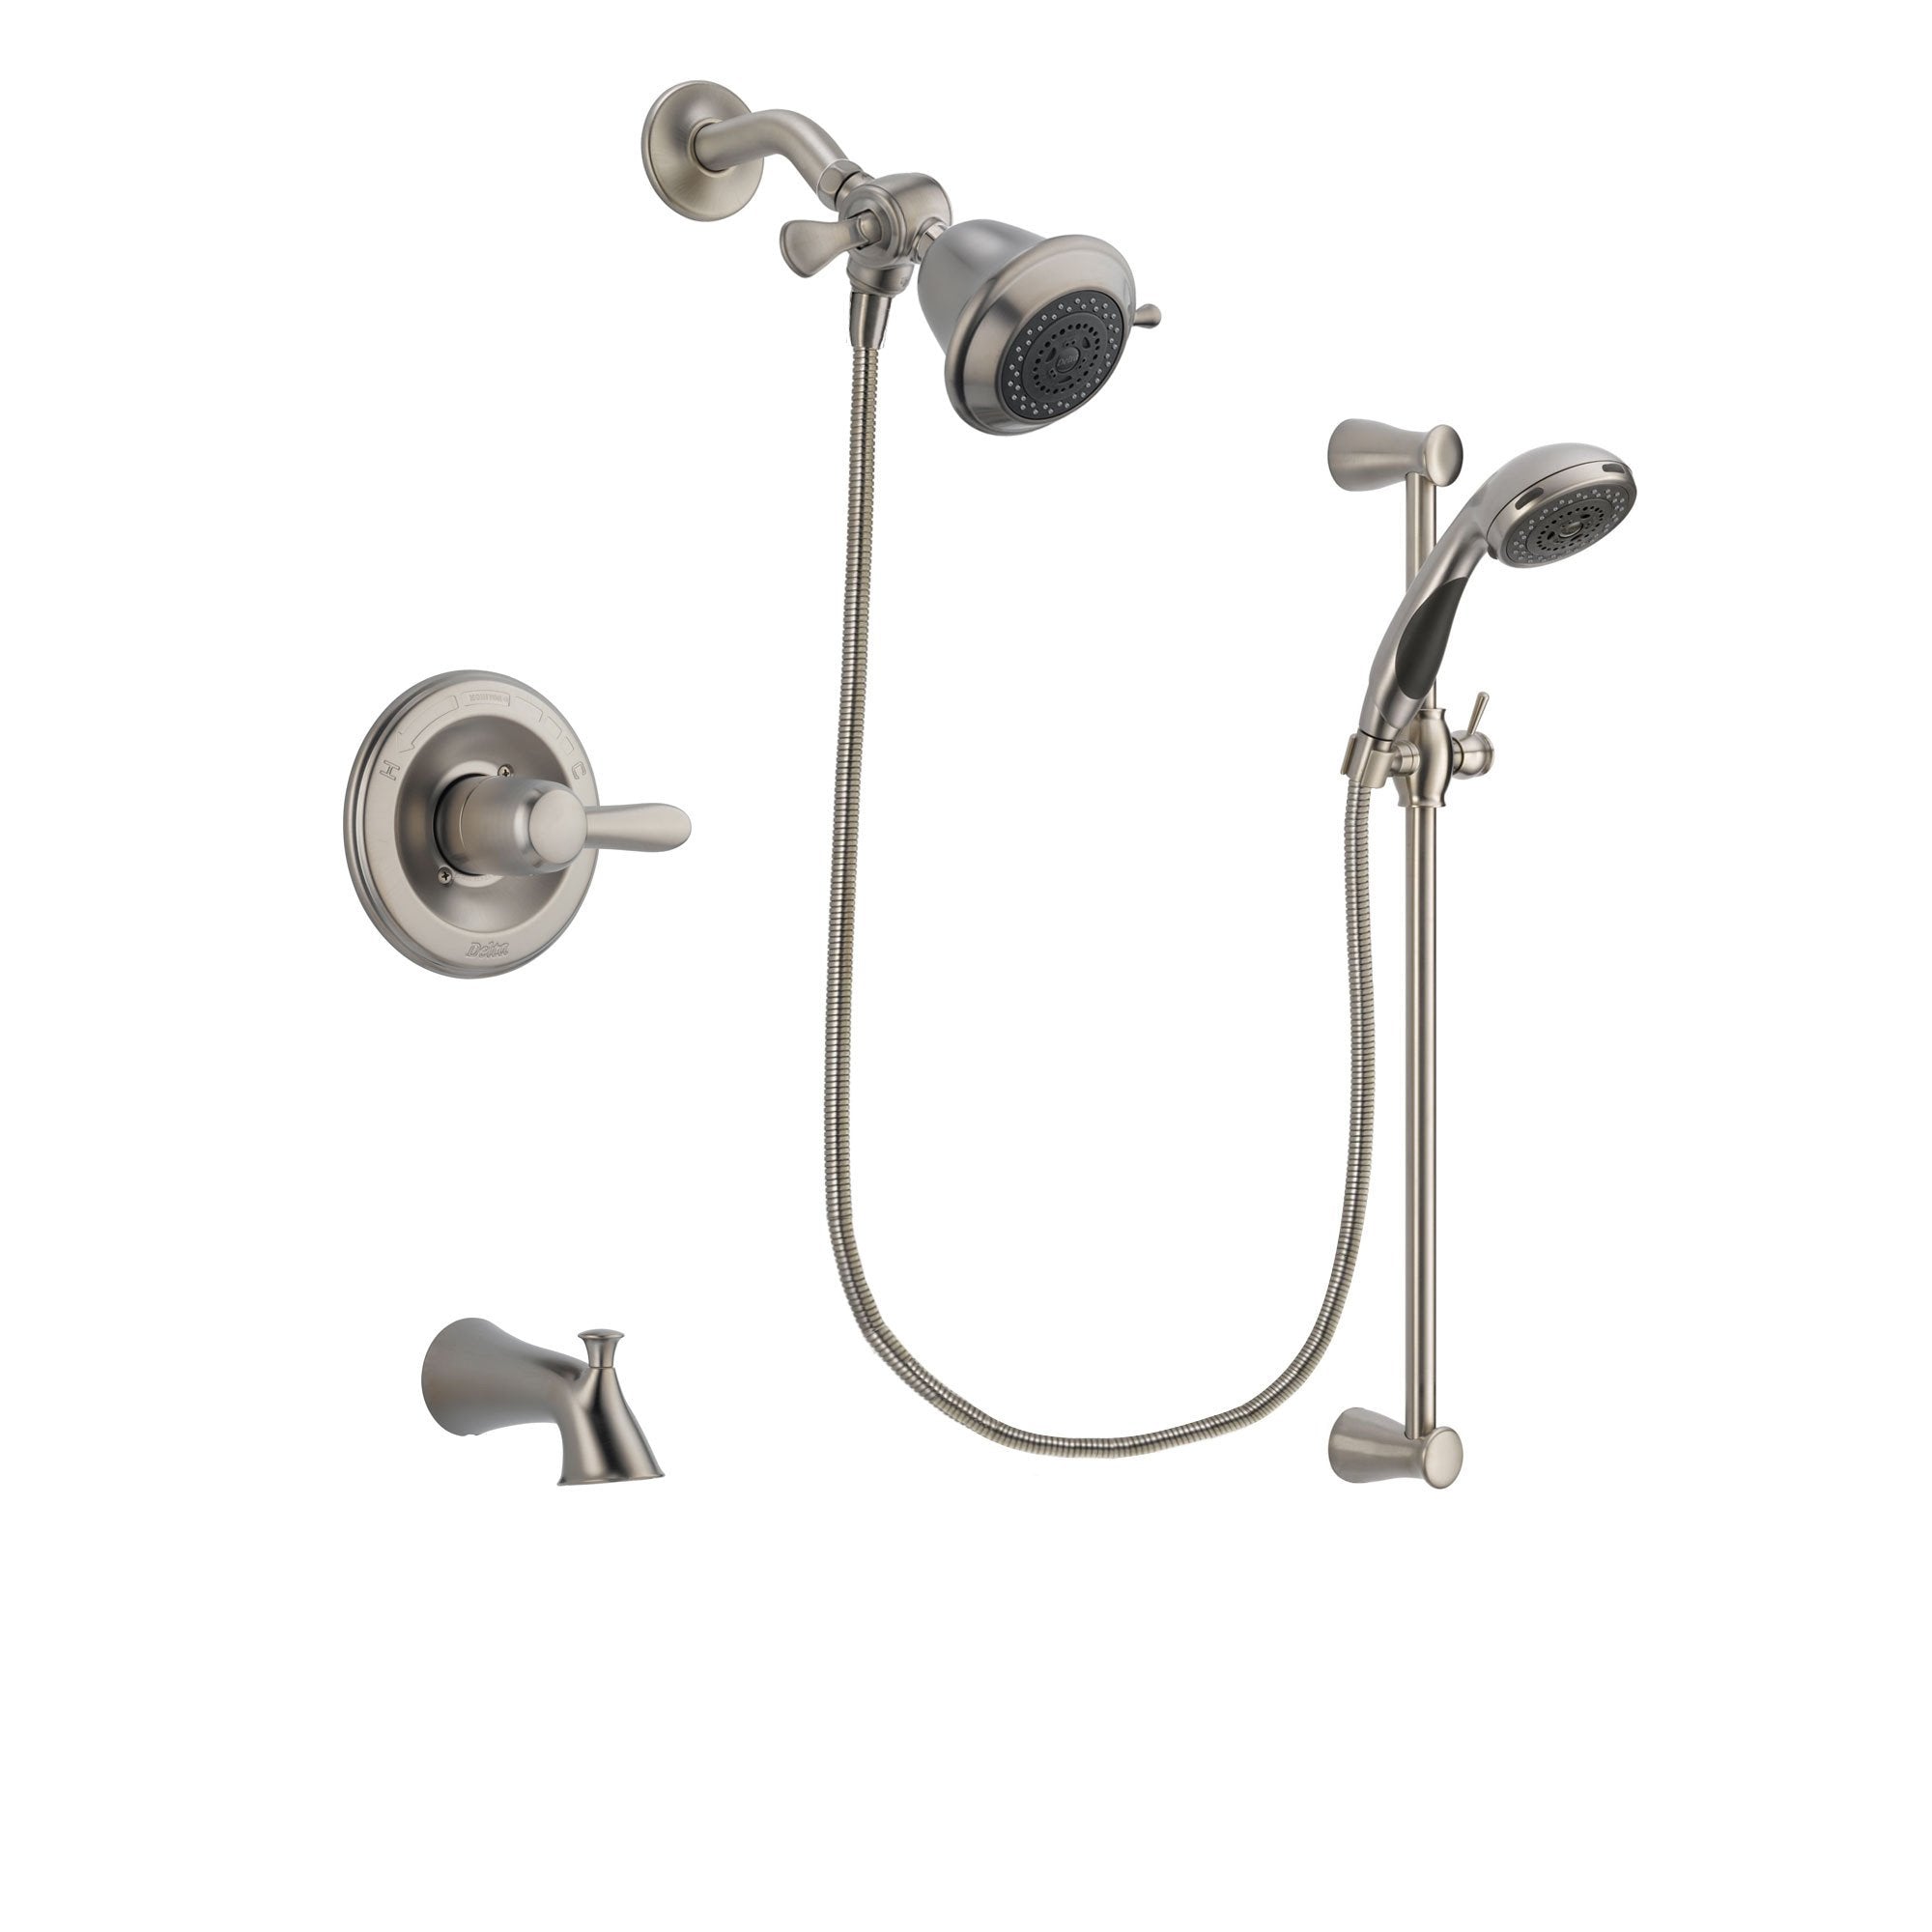 Delta Lahara Stainless Steel Finish Tub and Shower Faucet System Package with Shower Head and Handheld Shower Spray with Slide Bar Includes Rough-in Valve and Tub Spout DSP1523V